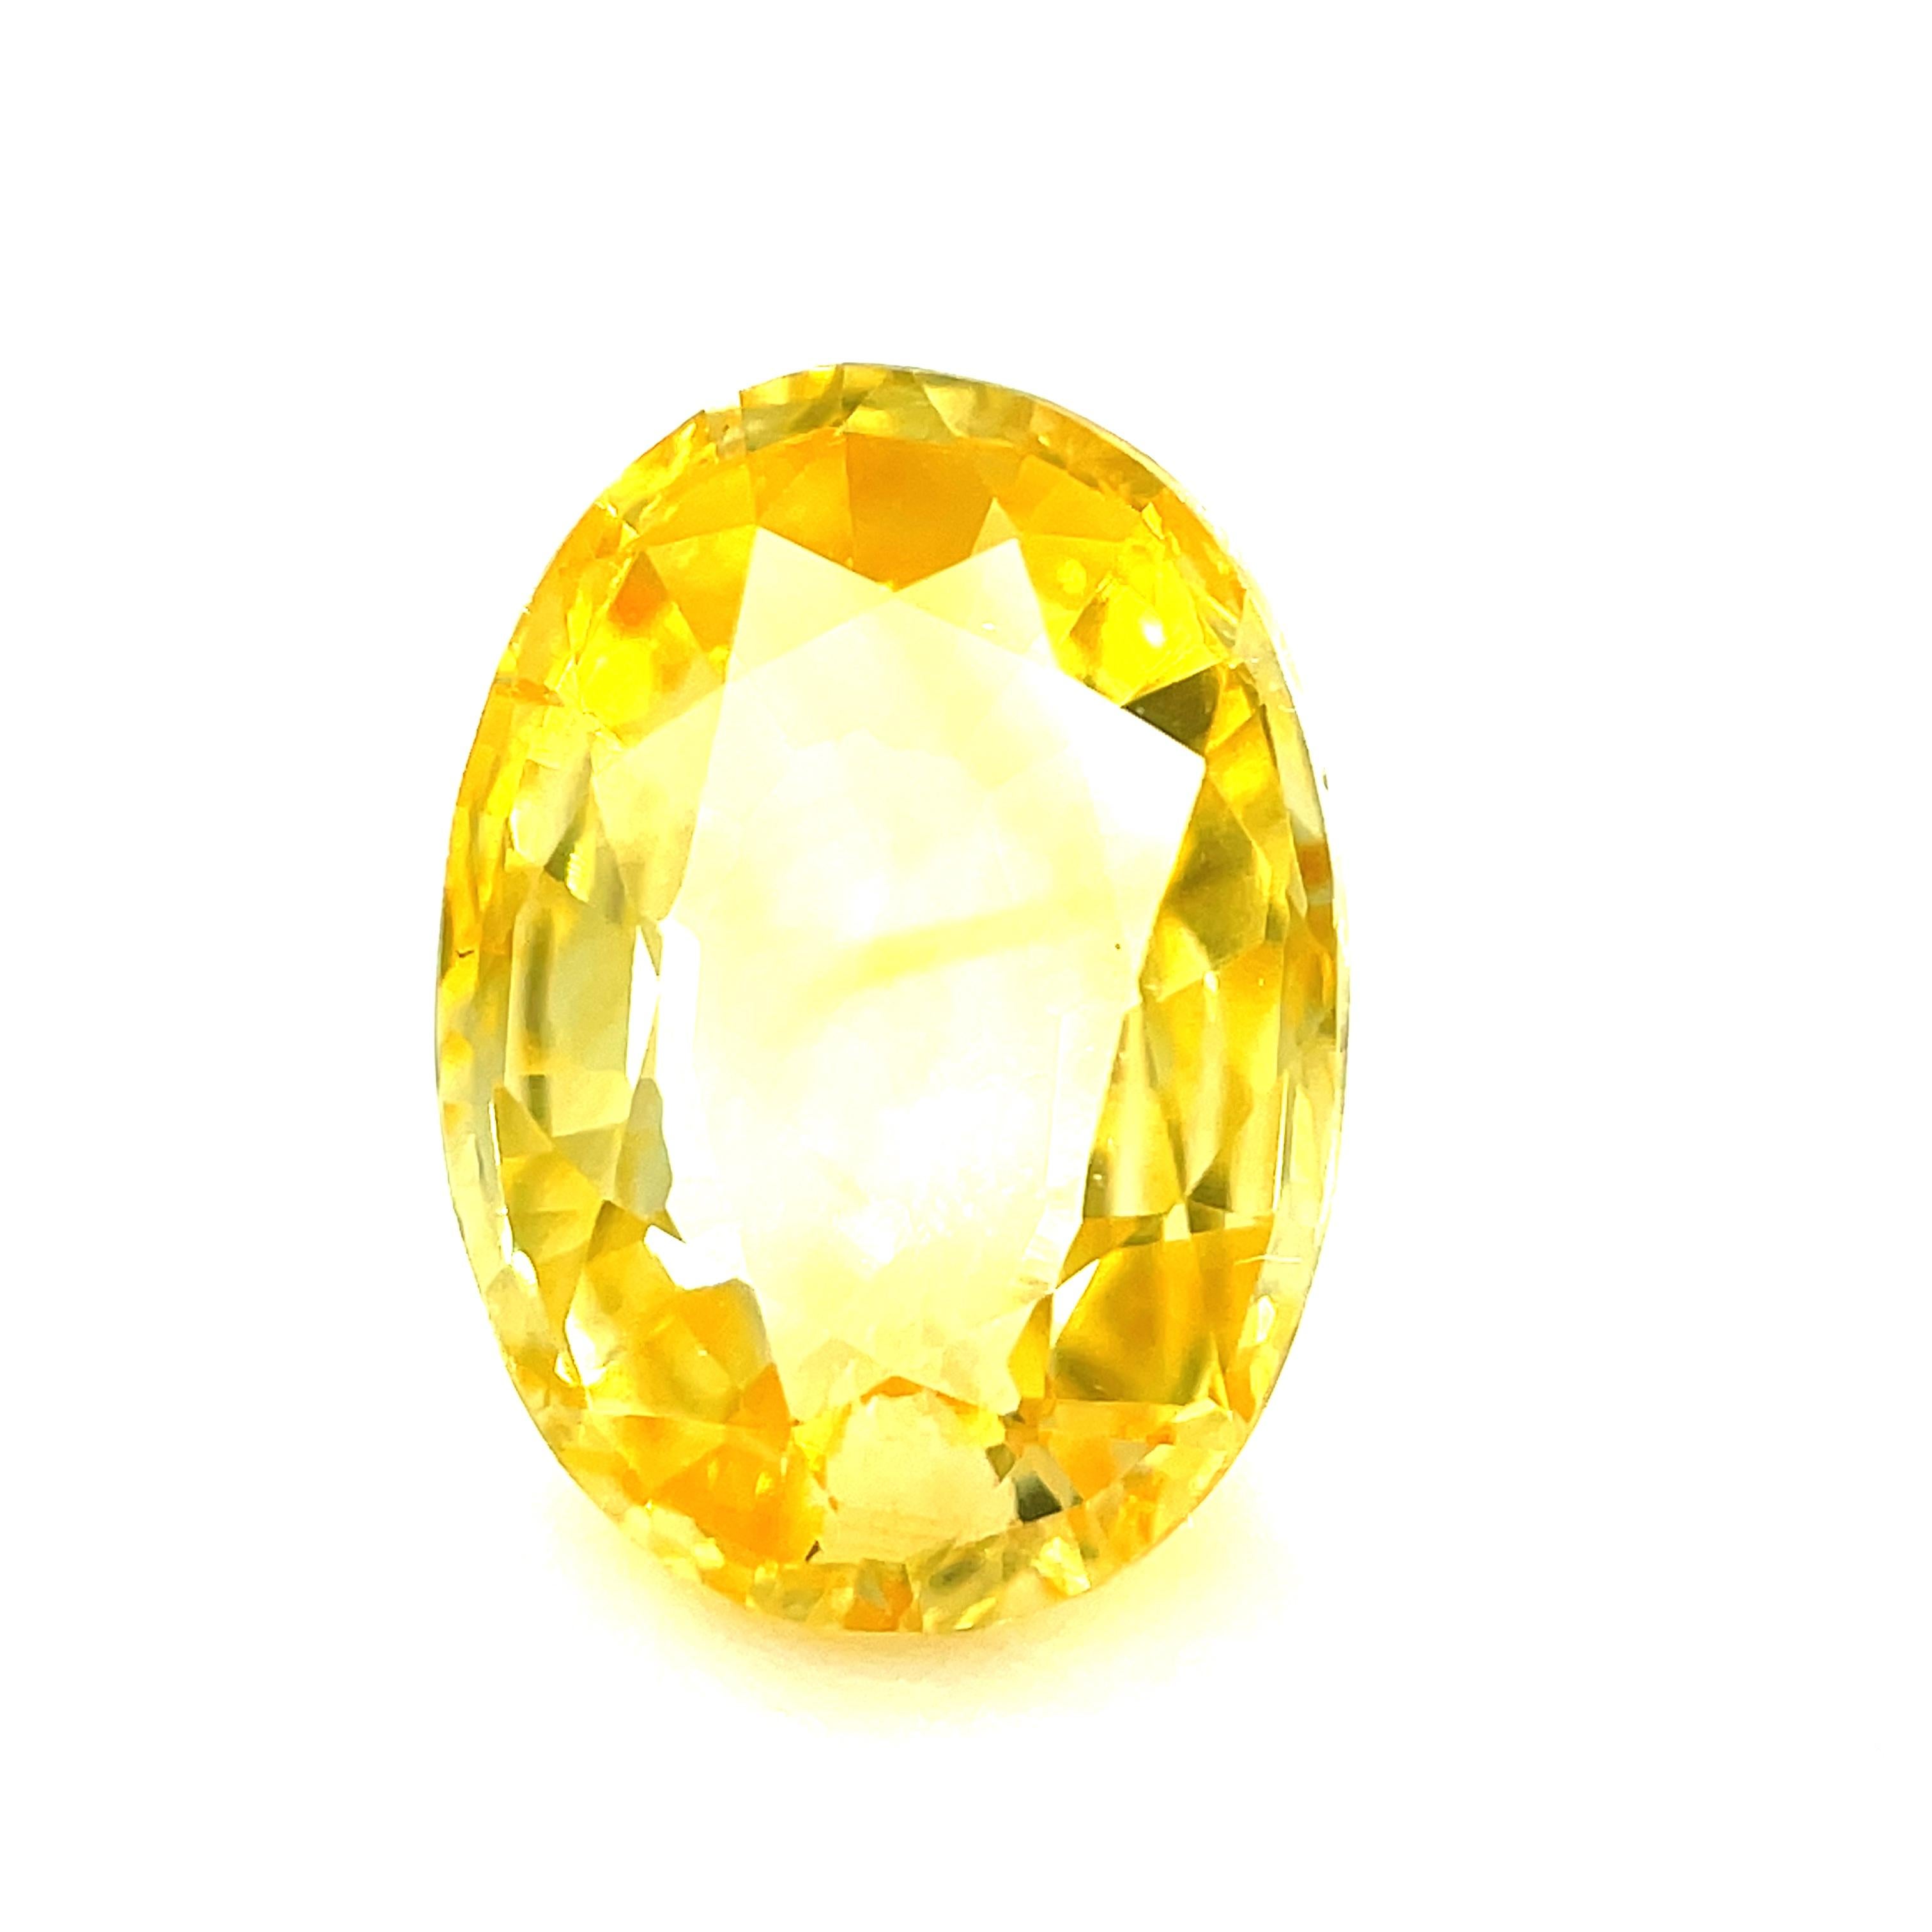 Women's or Men's 3.22 Carat Oval Yellow Sapphire Loose Unset 3-Stone Ring or Pendant Gemstone For Sale